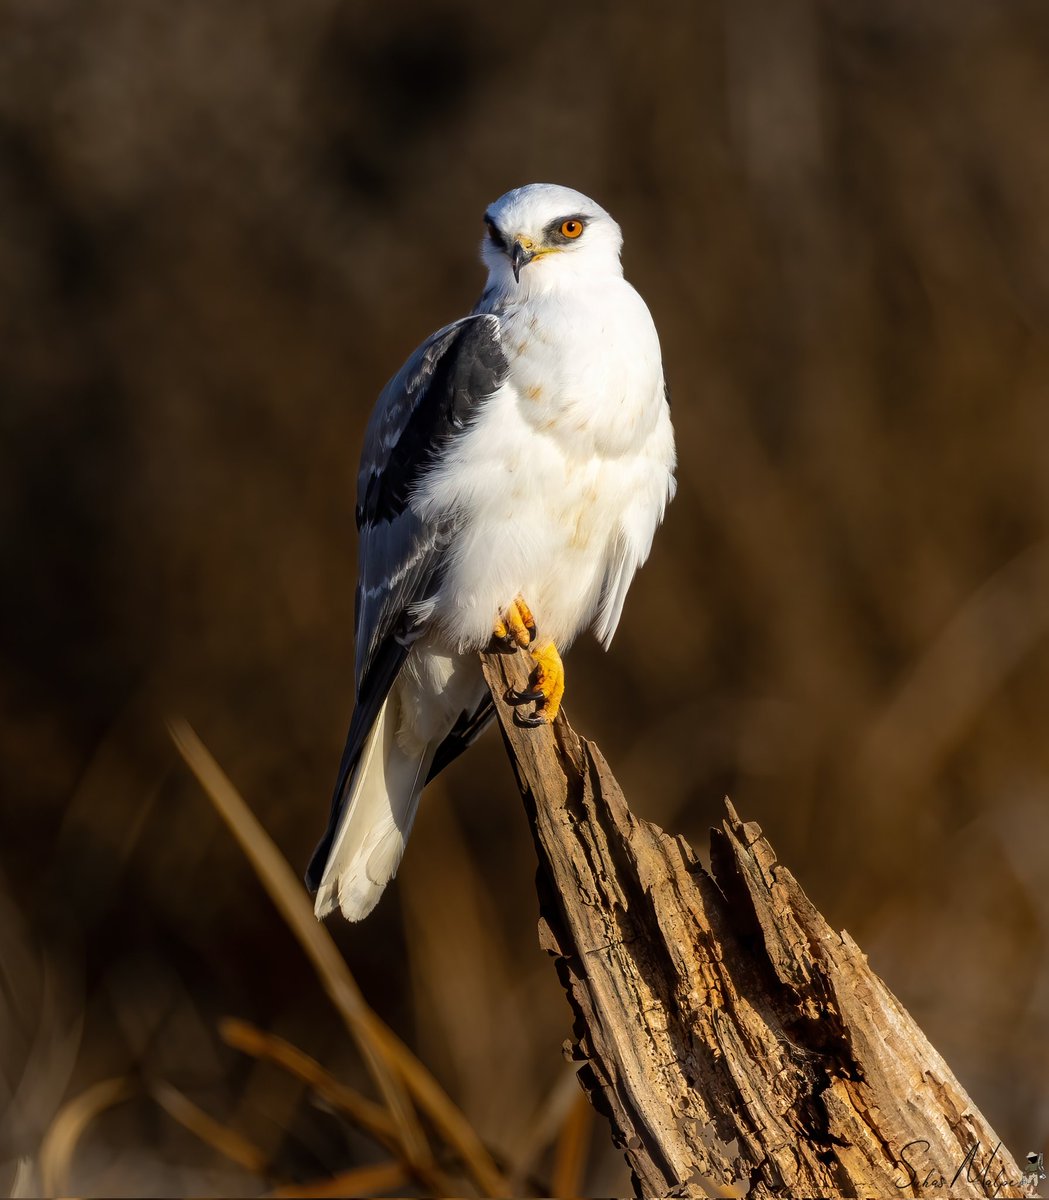 At the edge of a grassland, a White-tailed Kite perched on an exposed tree with a good view of the surroundings #birds #whitetailedkite #birdsofprey #raptors #birdwatching #bird #photography #birding #california #birdphotography #birdwatchers #naturephotography #nature #canon